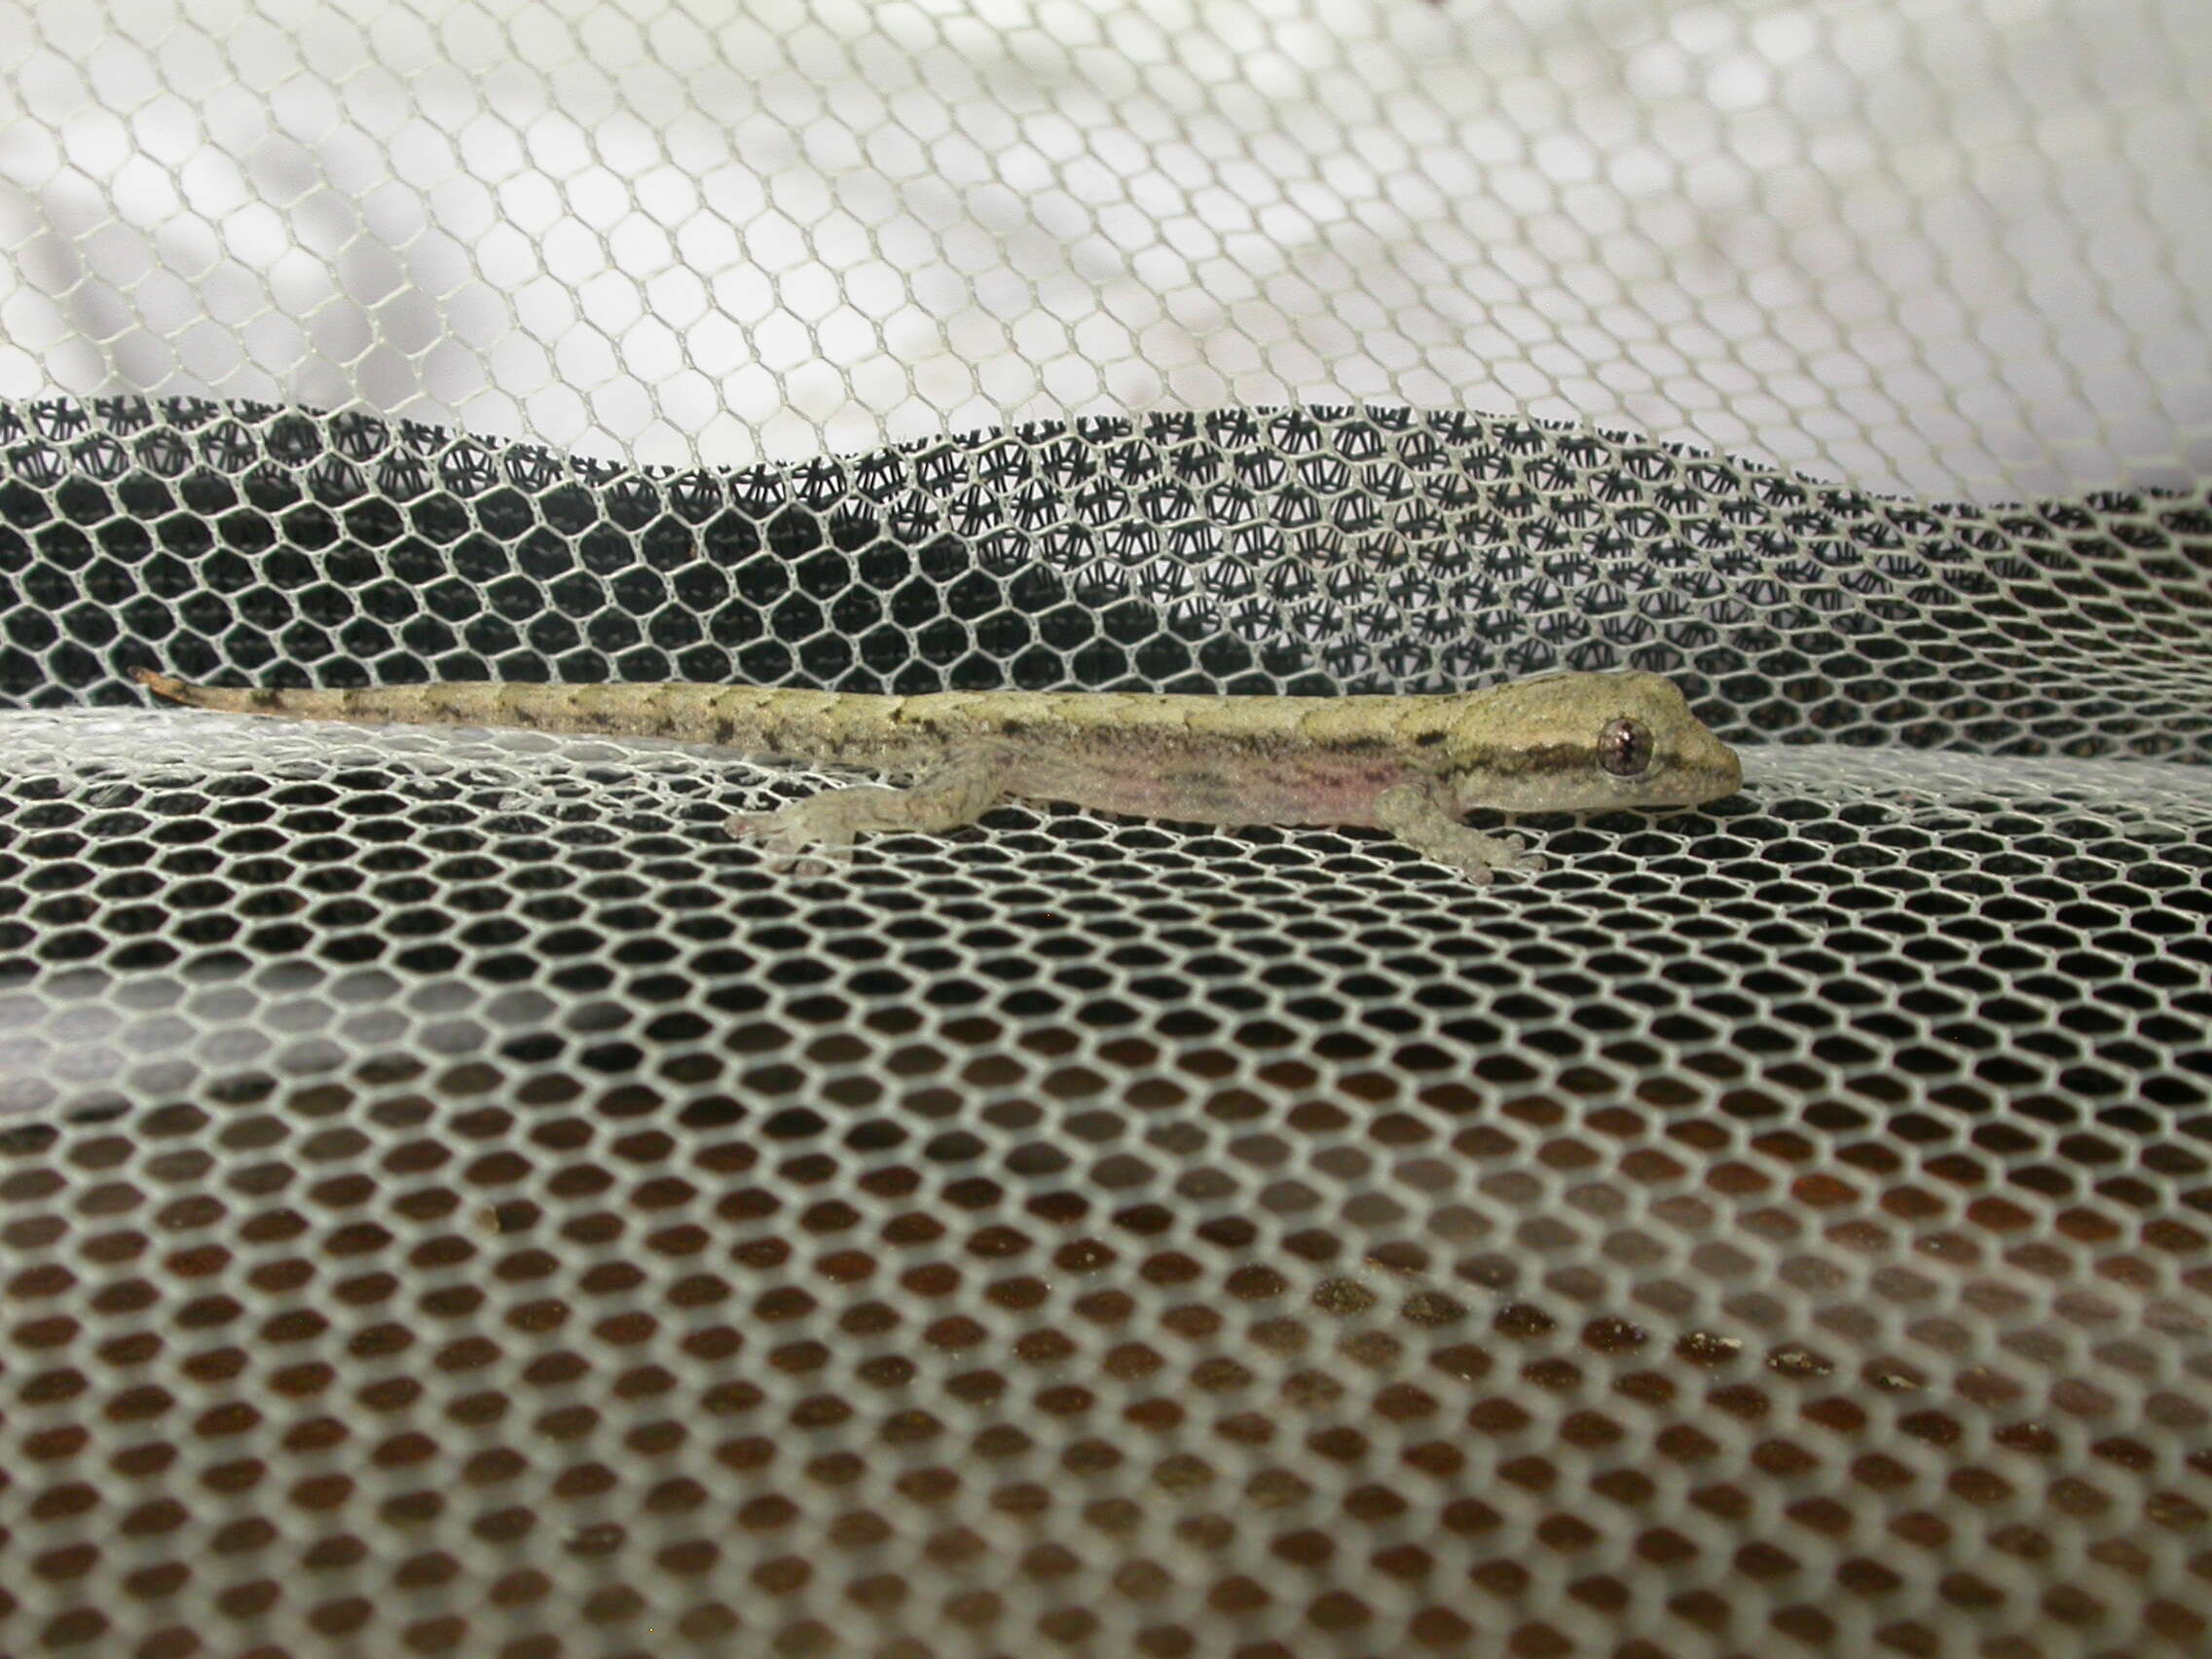 Image of Rotuman Forest Gecko